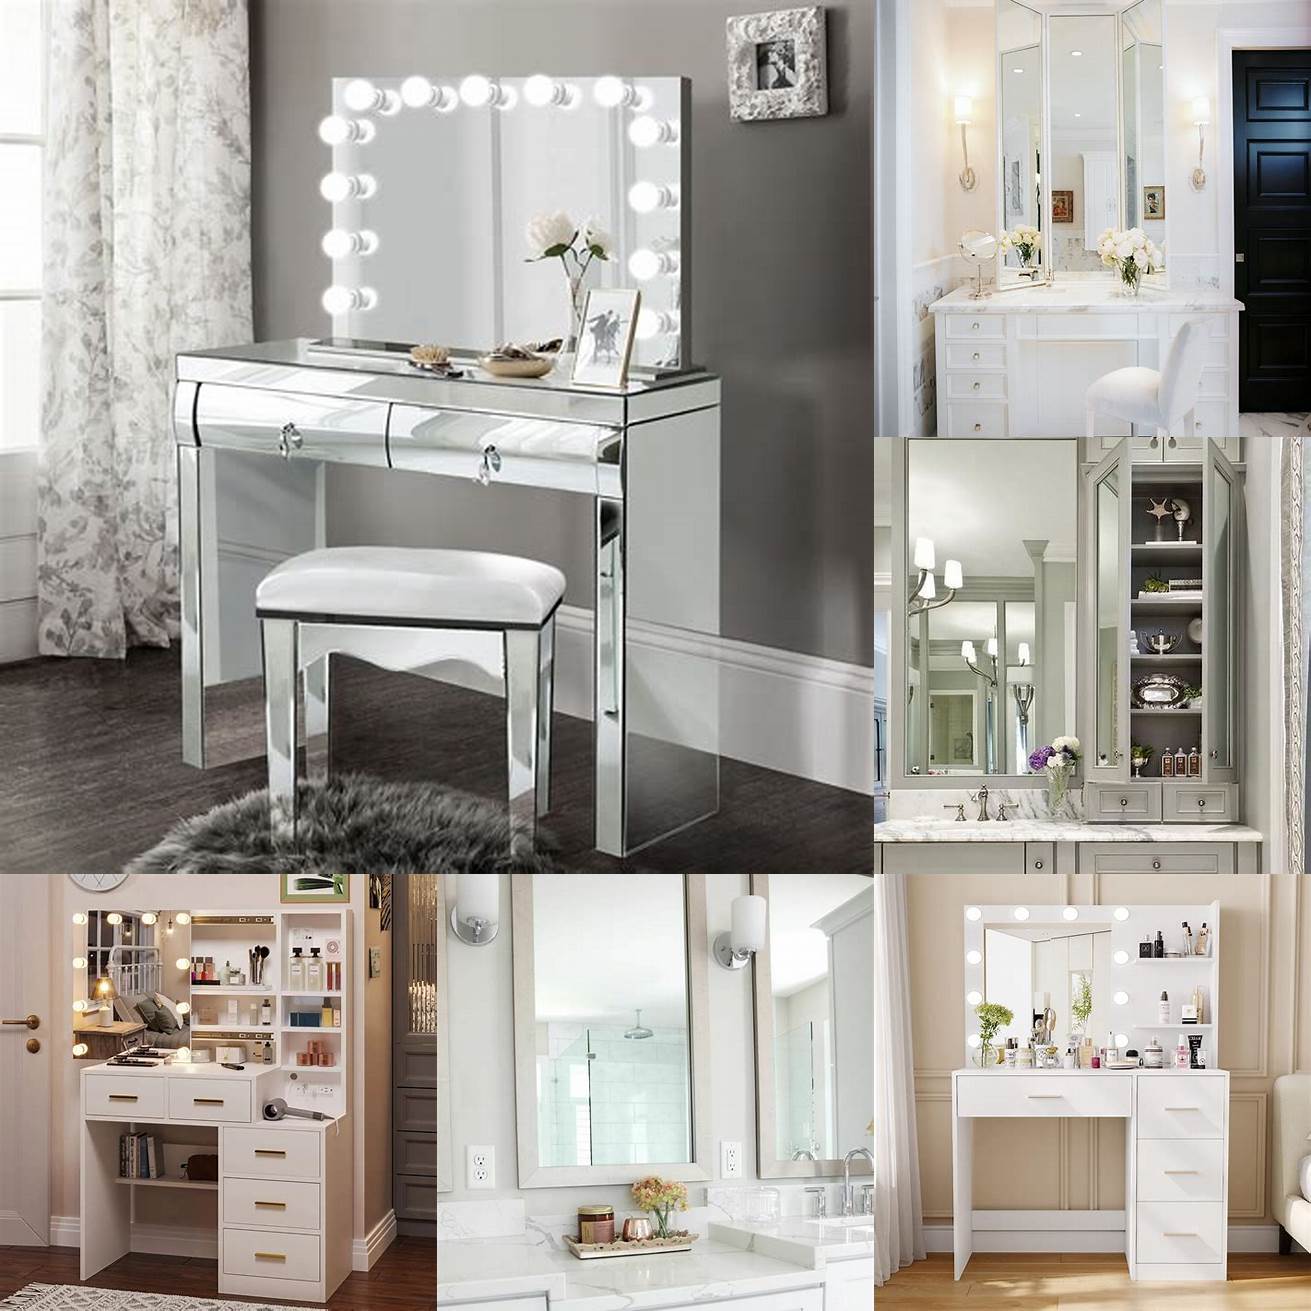 A white bathroom vanity with makeup station and a large mirror